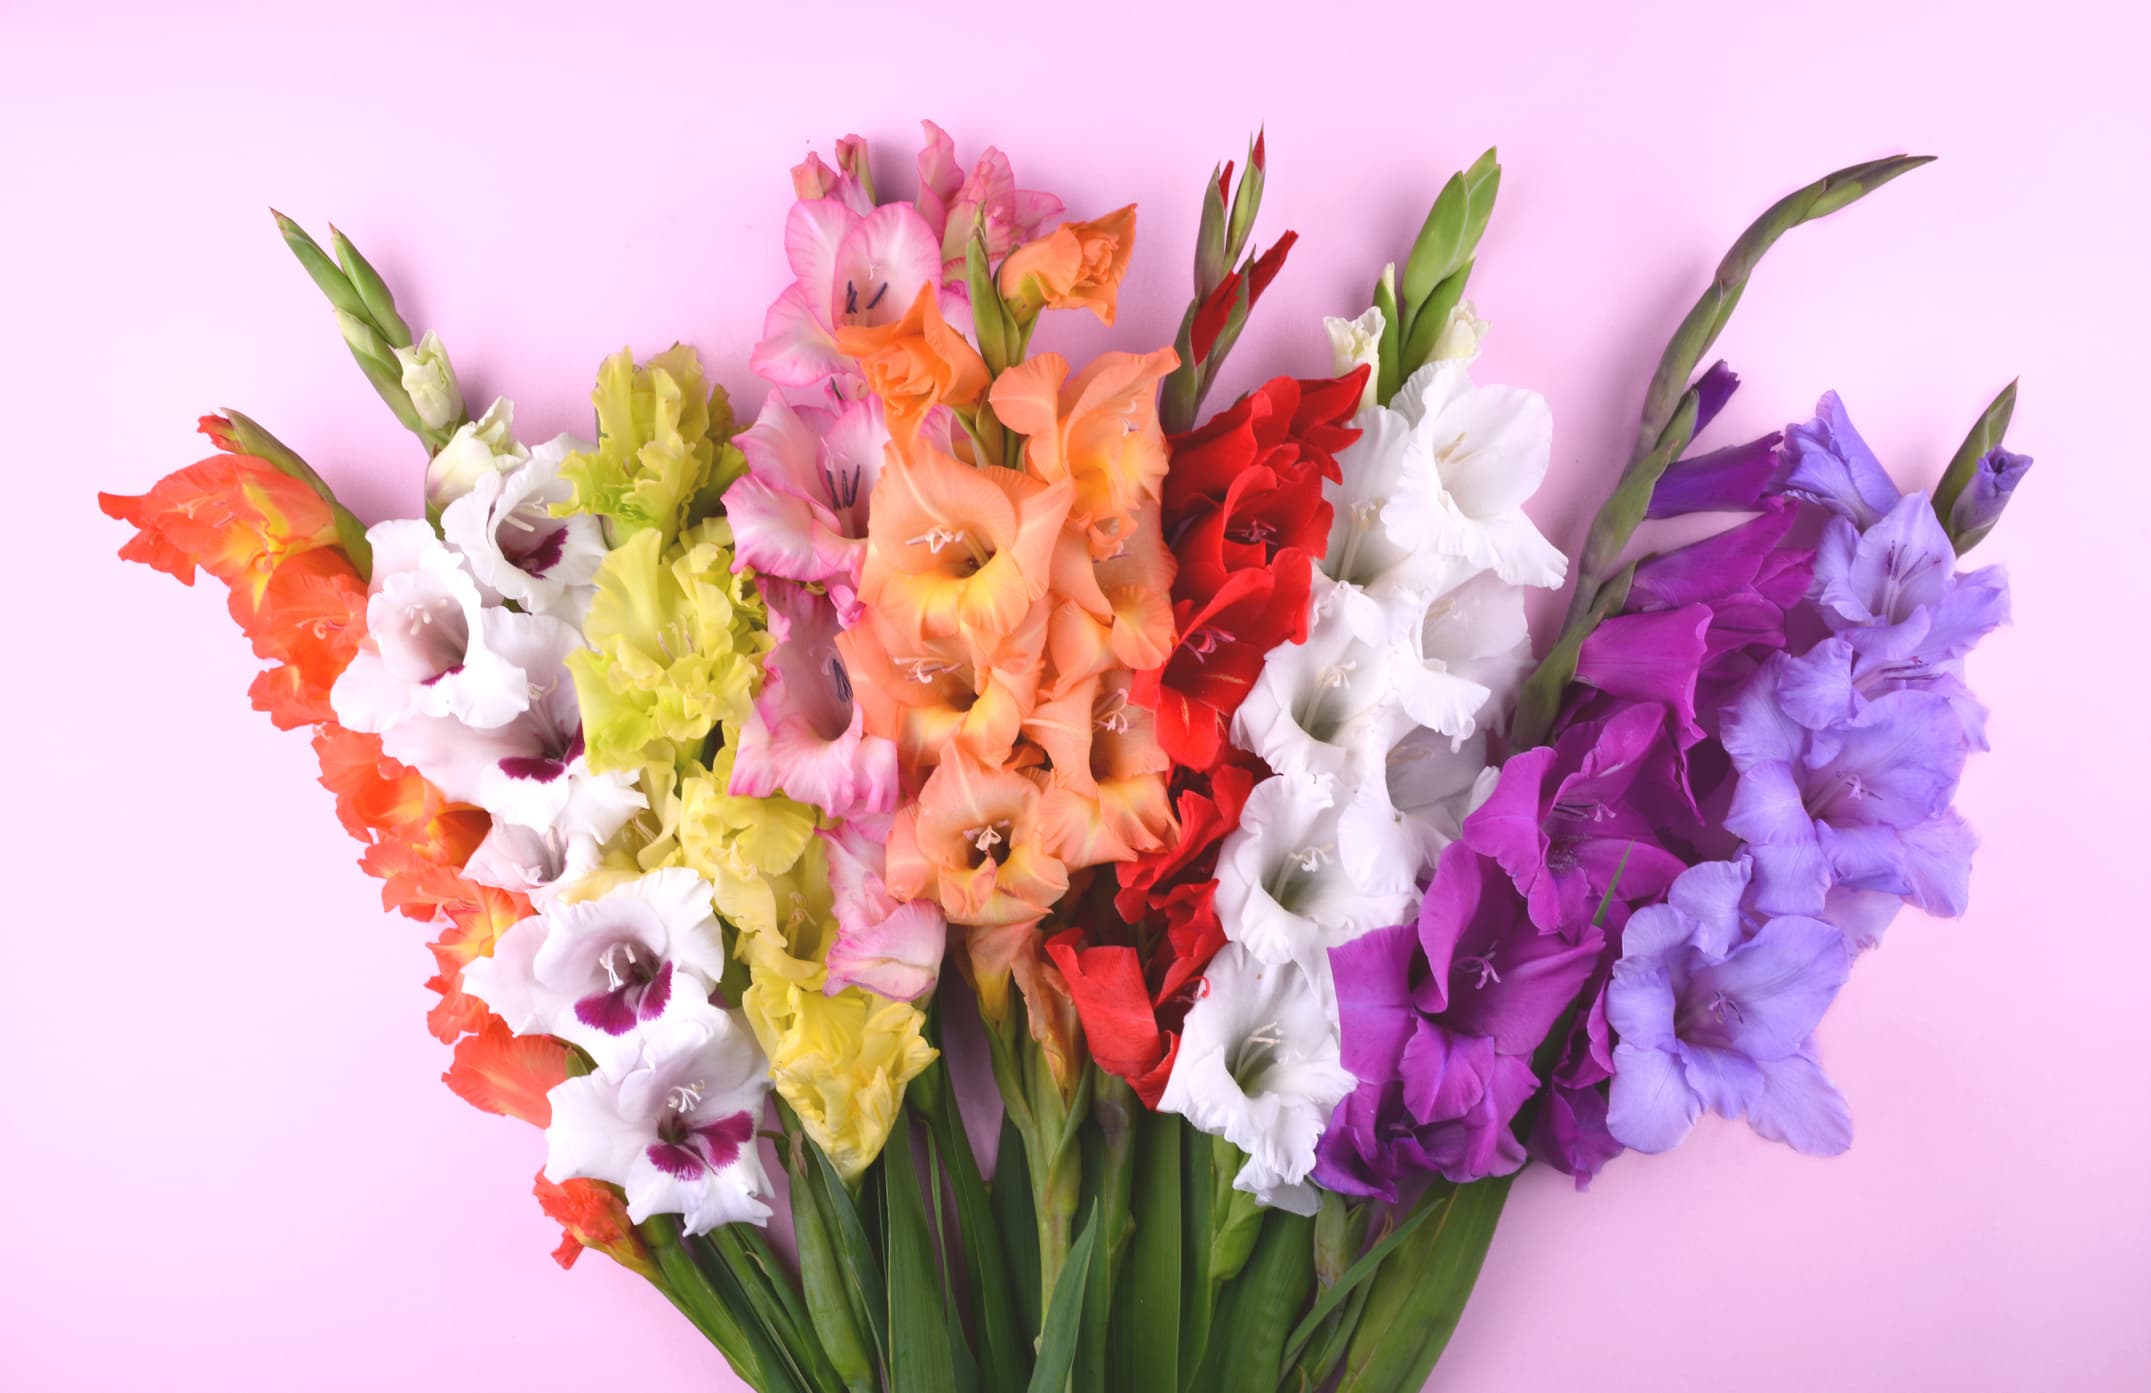 Beautiful gladiolus flowers on trendy pink background. Flat lay style.